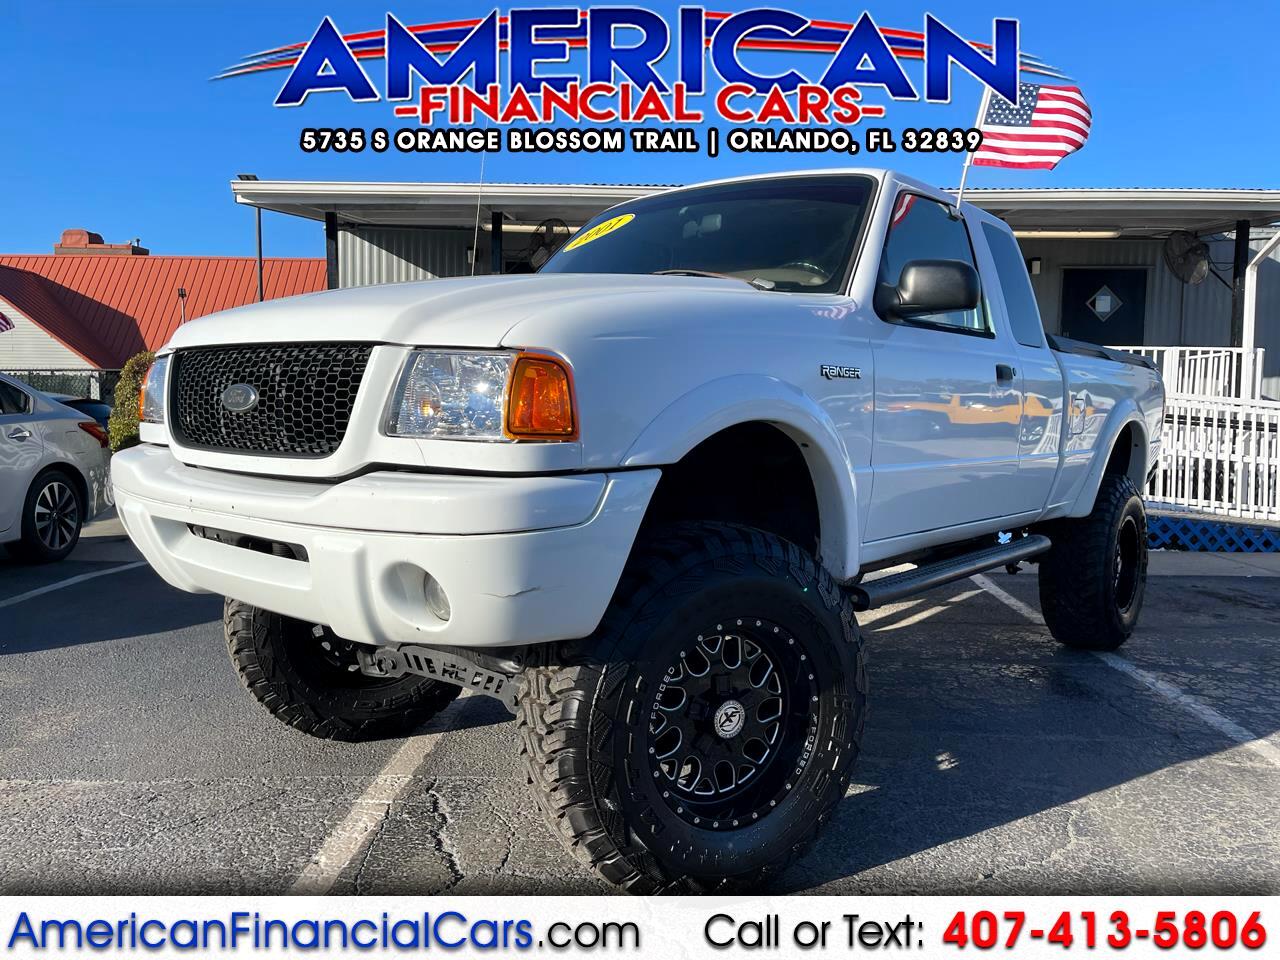 Ford Ranger Supercab 4.0L XLT Off-Rd 4WD w/391A 2001